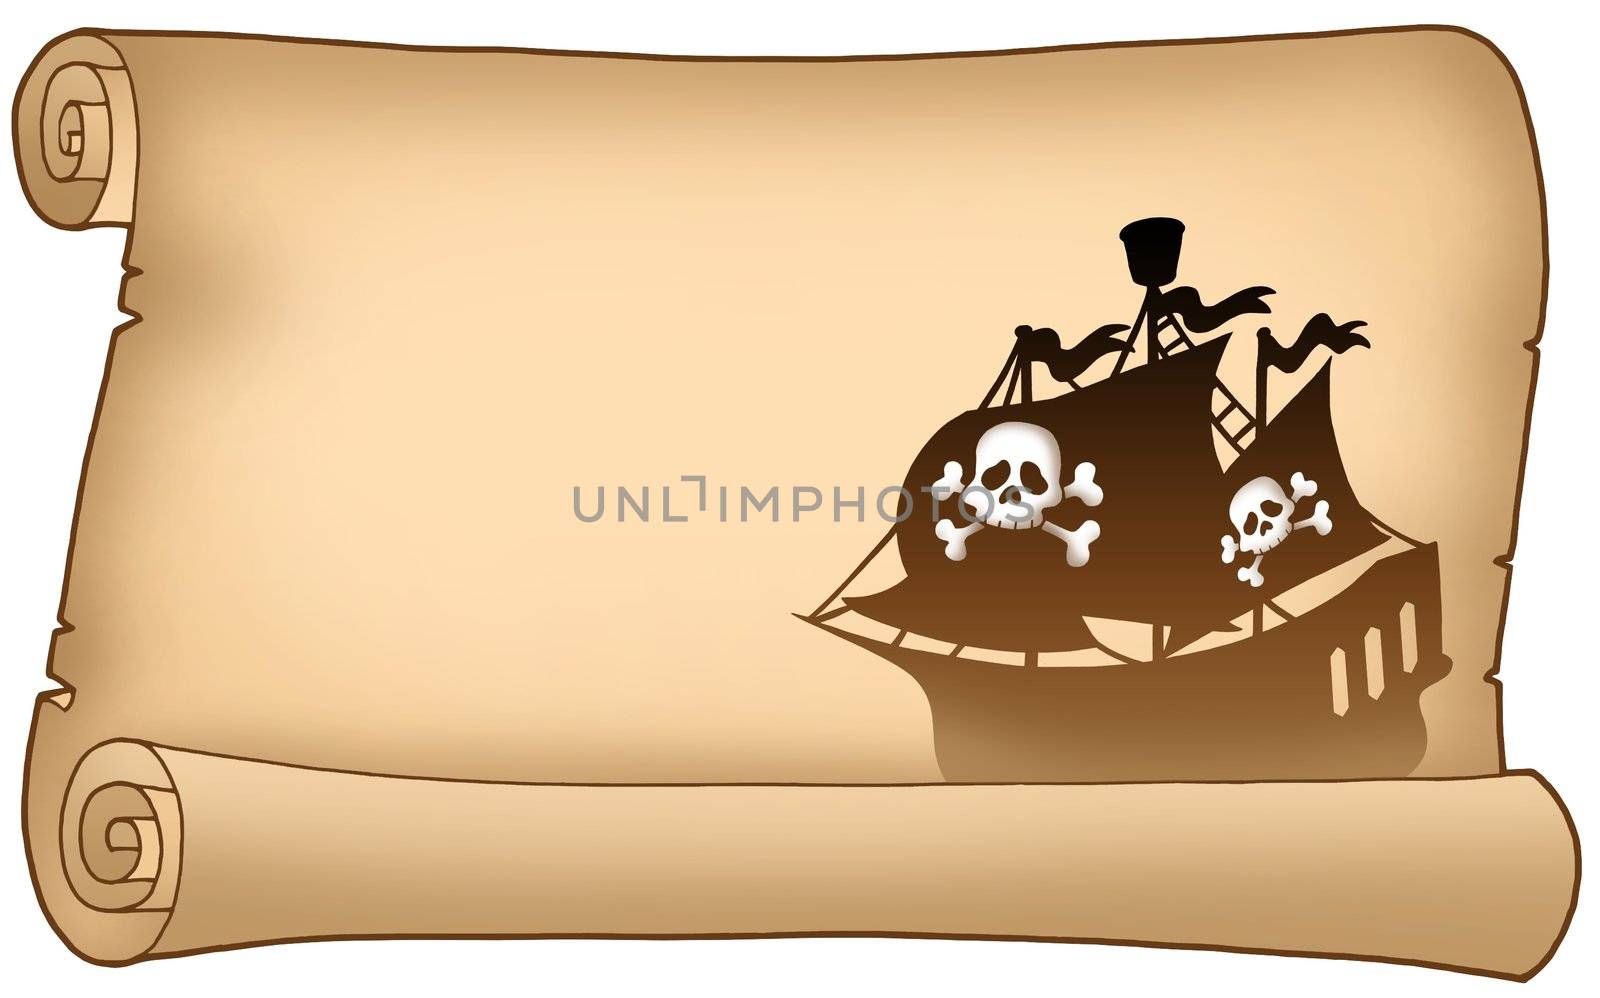 Parchment with pirate ship silhouette - color illustration.